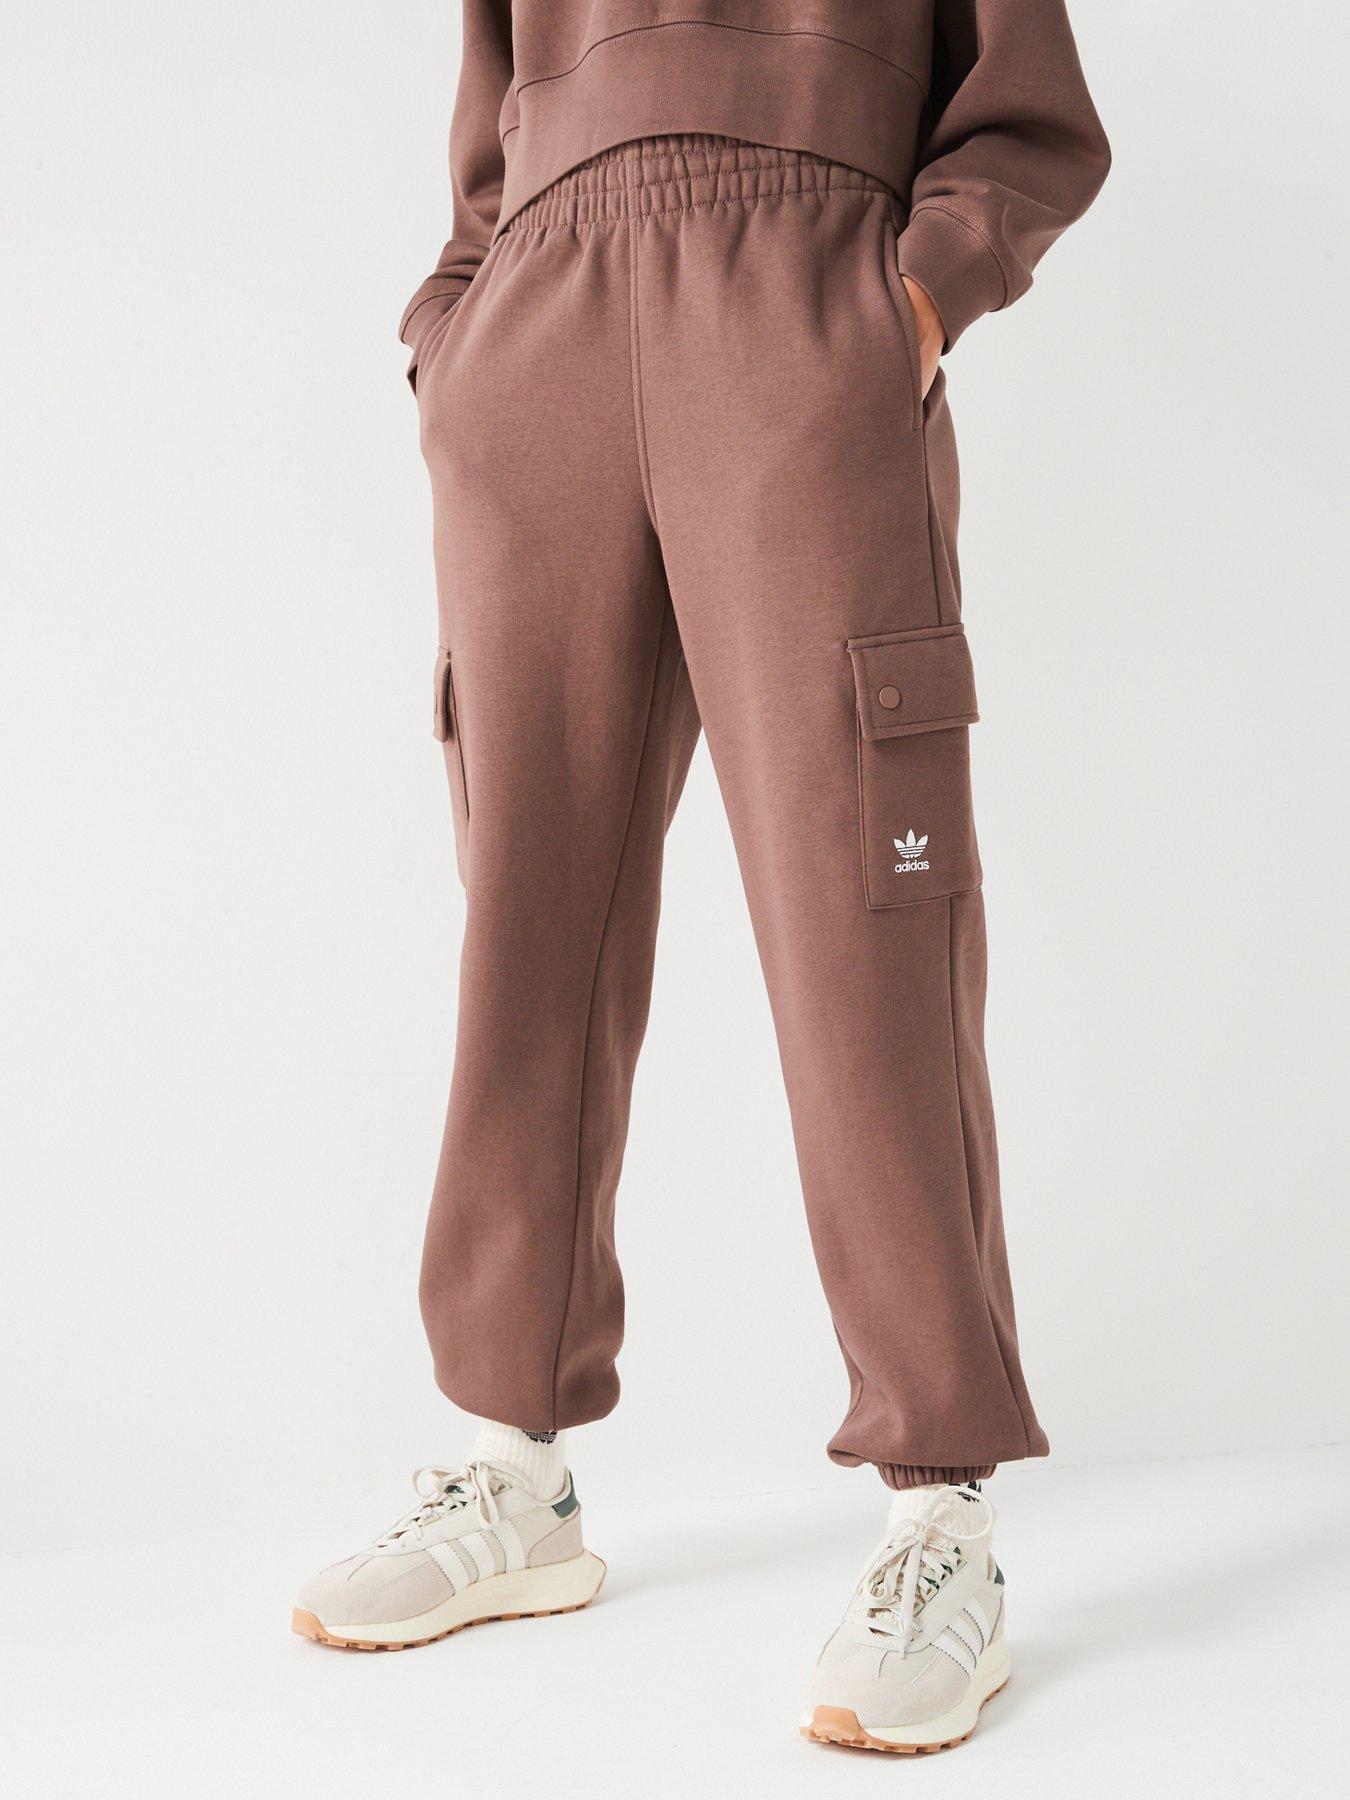 Adidas originals adicolor 70s' flared pants, Men's Fashion, Bottoms,  Trousers on Carousell